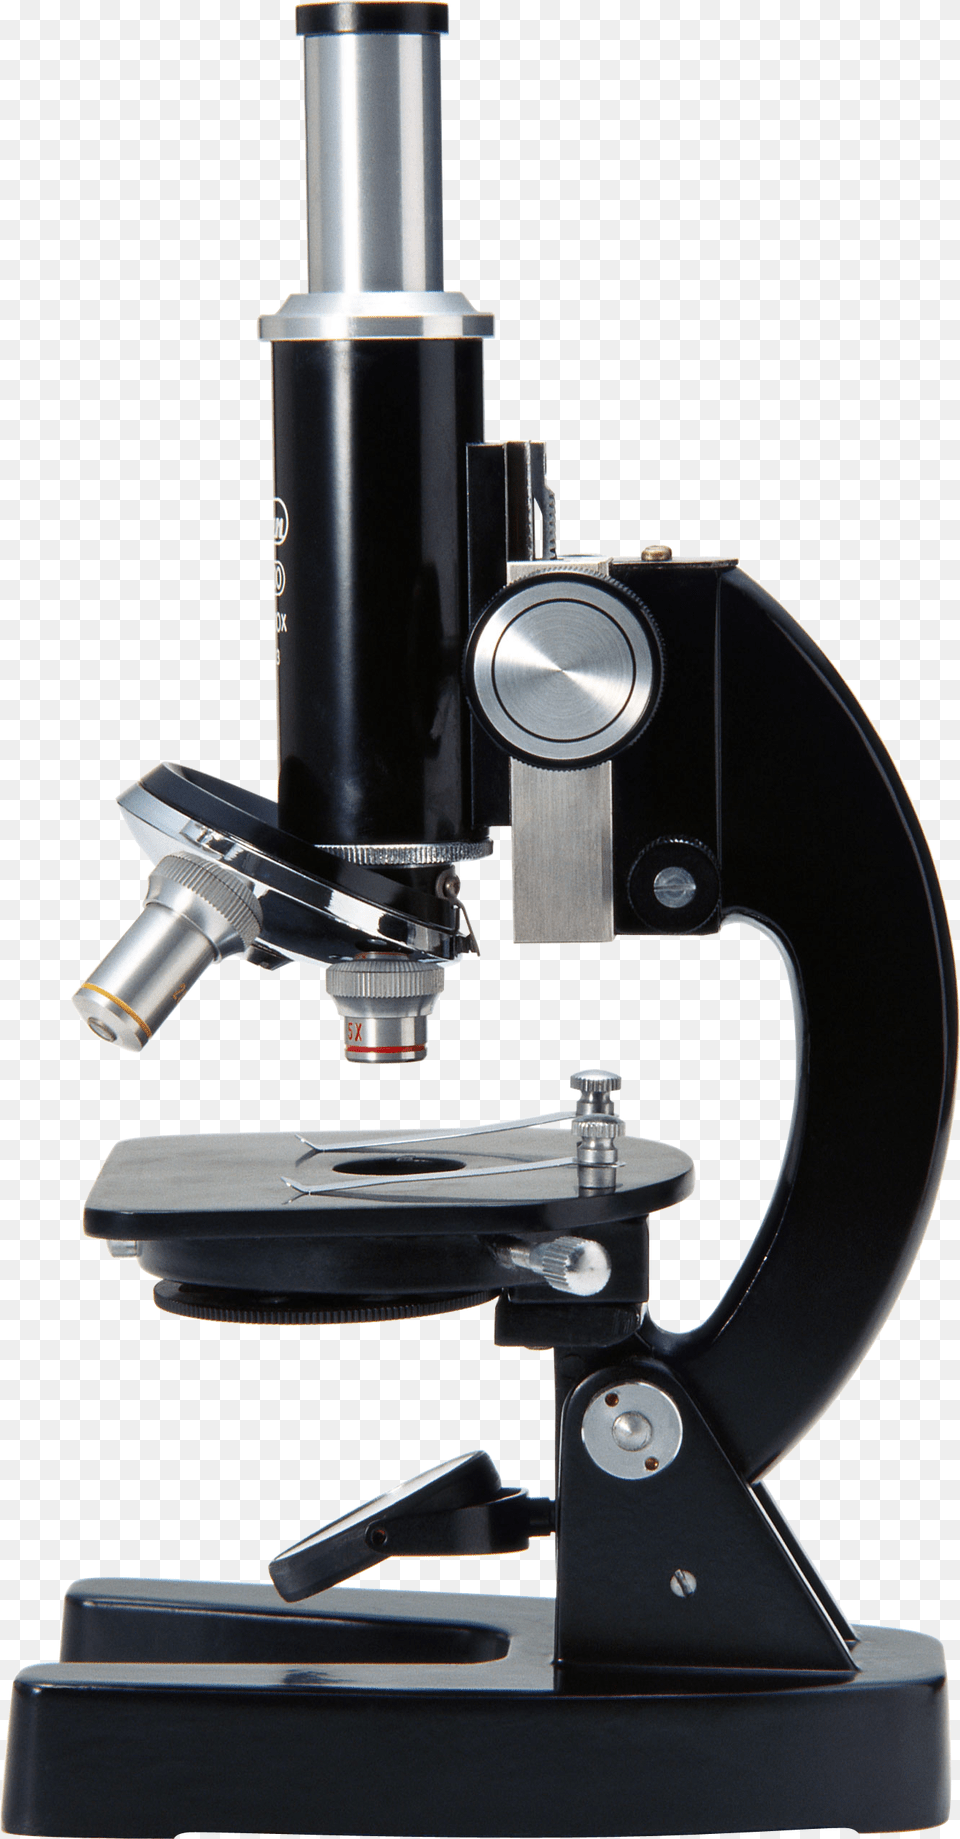 Microscope Images Microscope Free Transparent Png